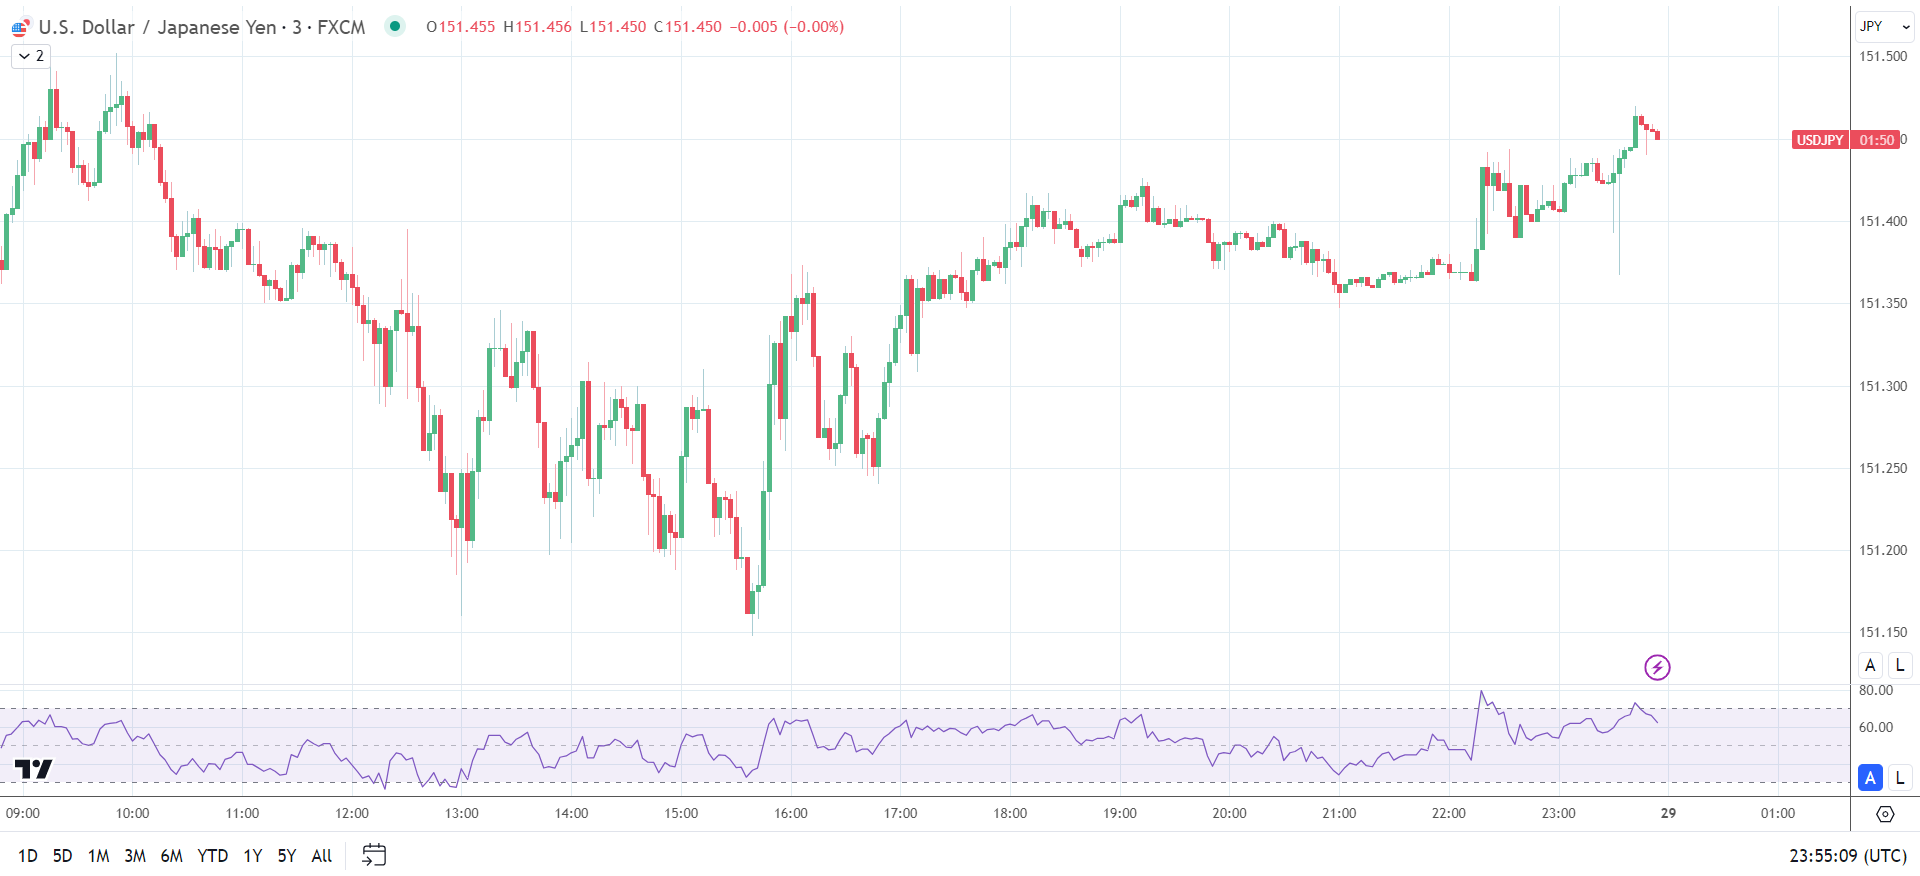 USD/JPY responds to conflicting economic indicators from Japan.